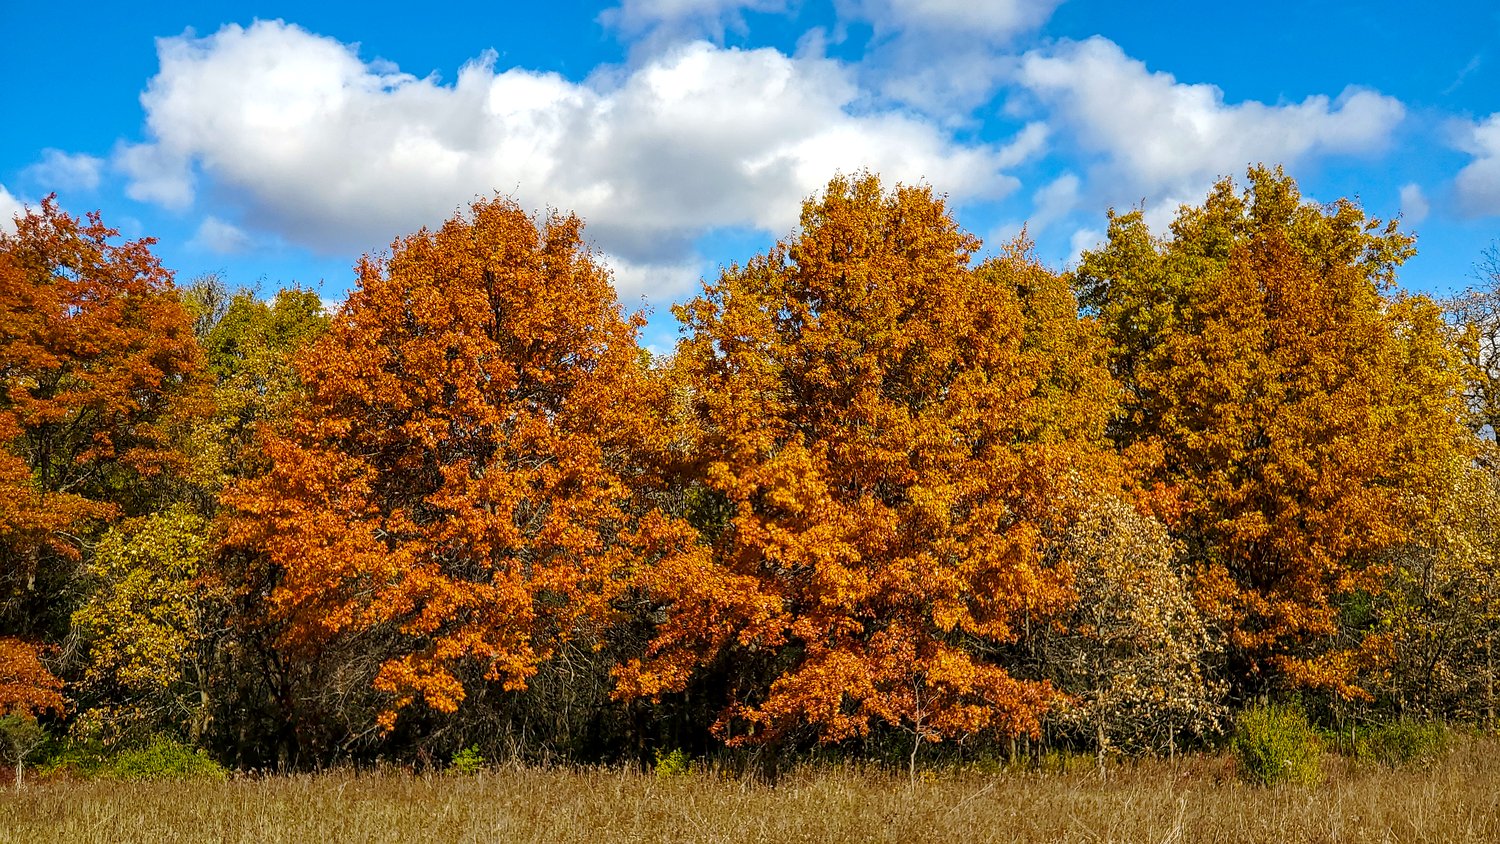 Full autumn display at Rush Creek Conservation Area.